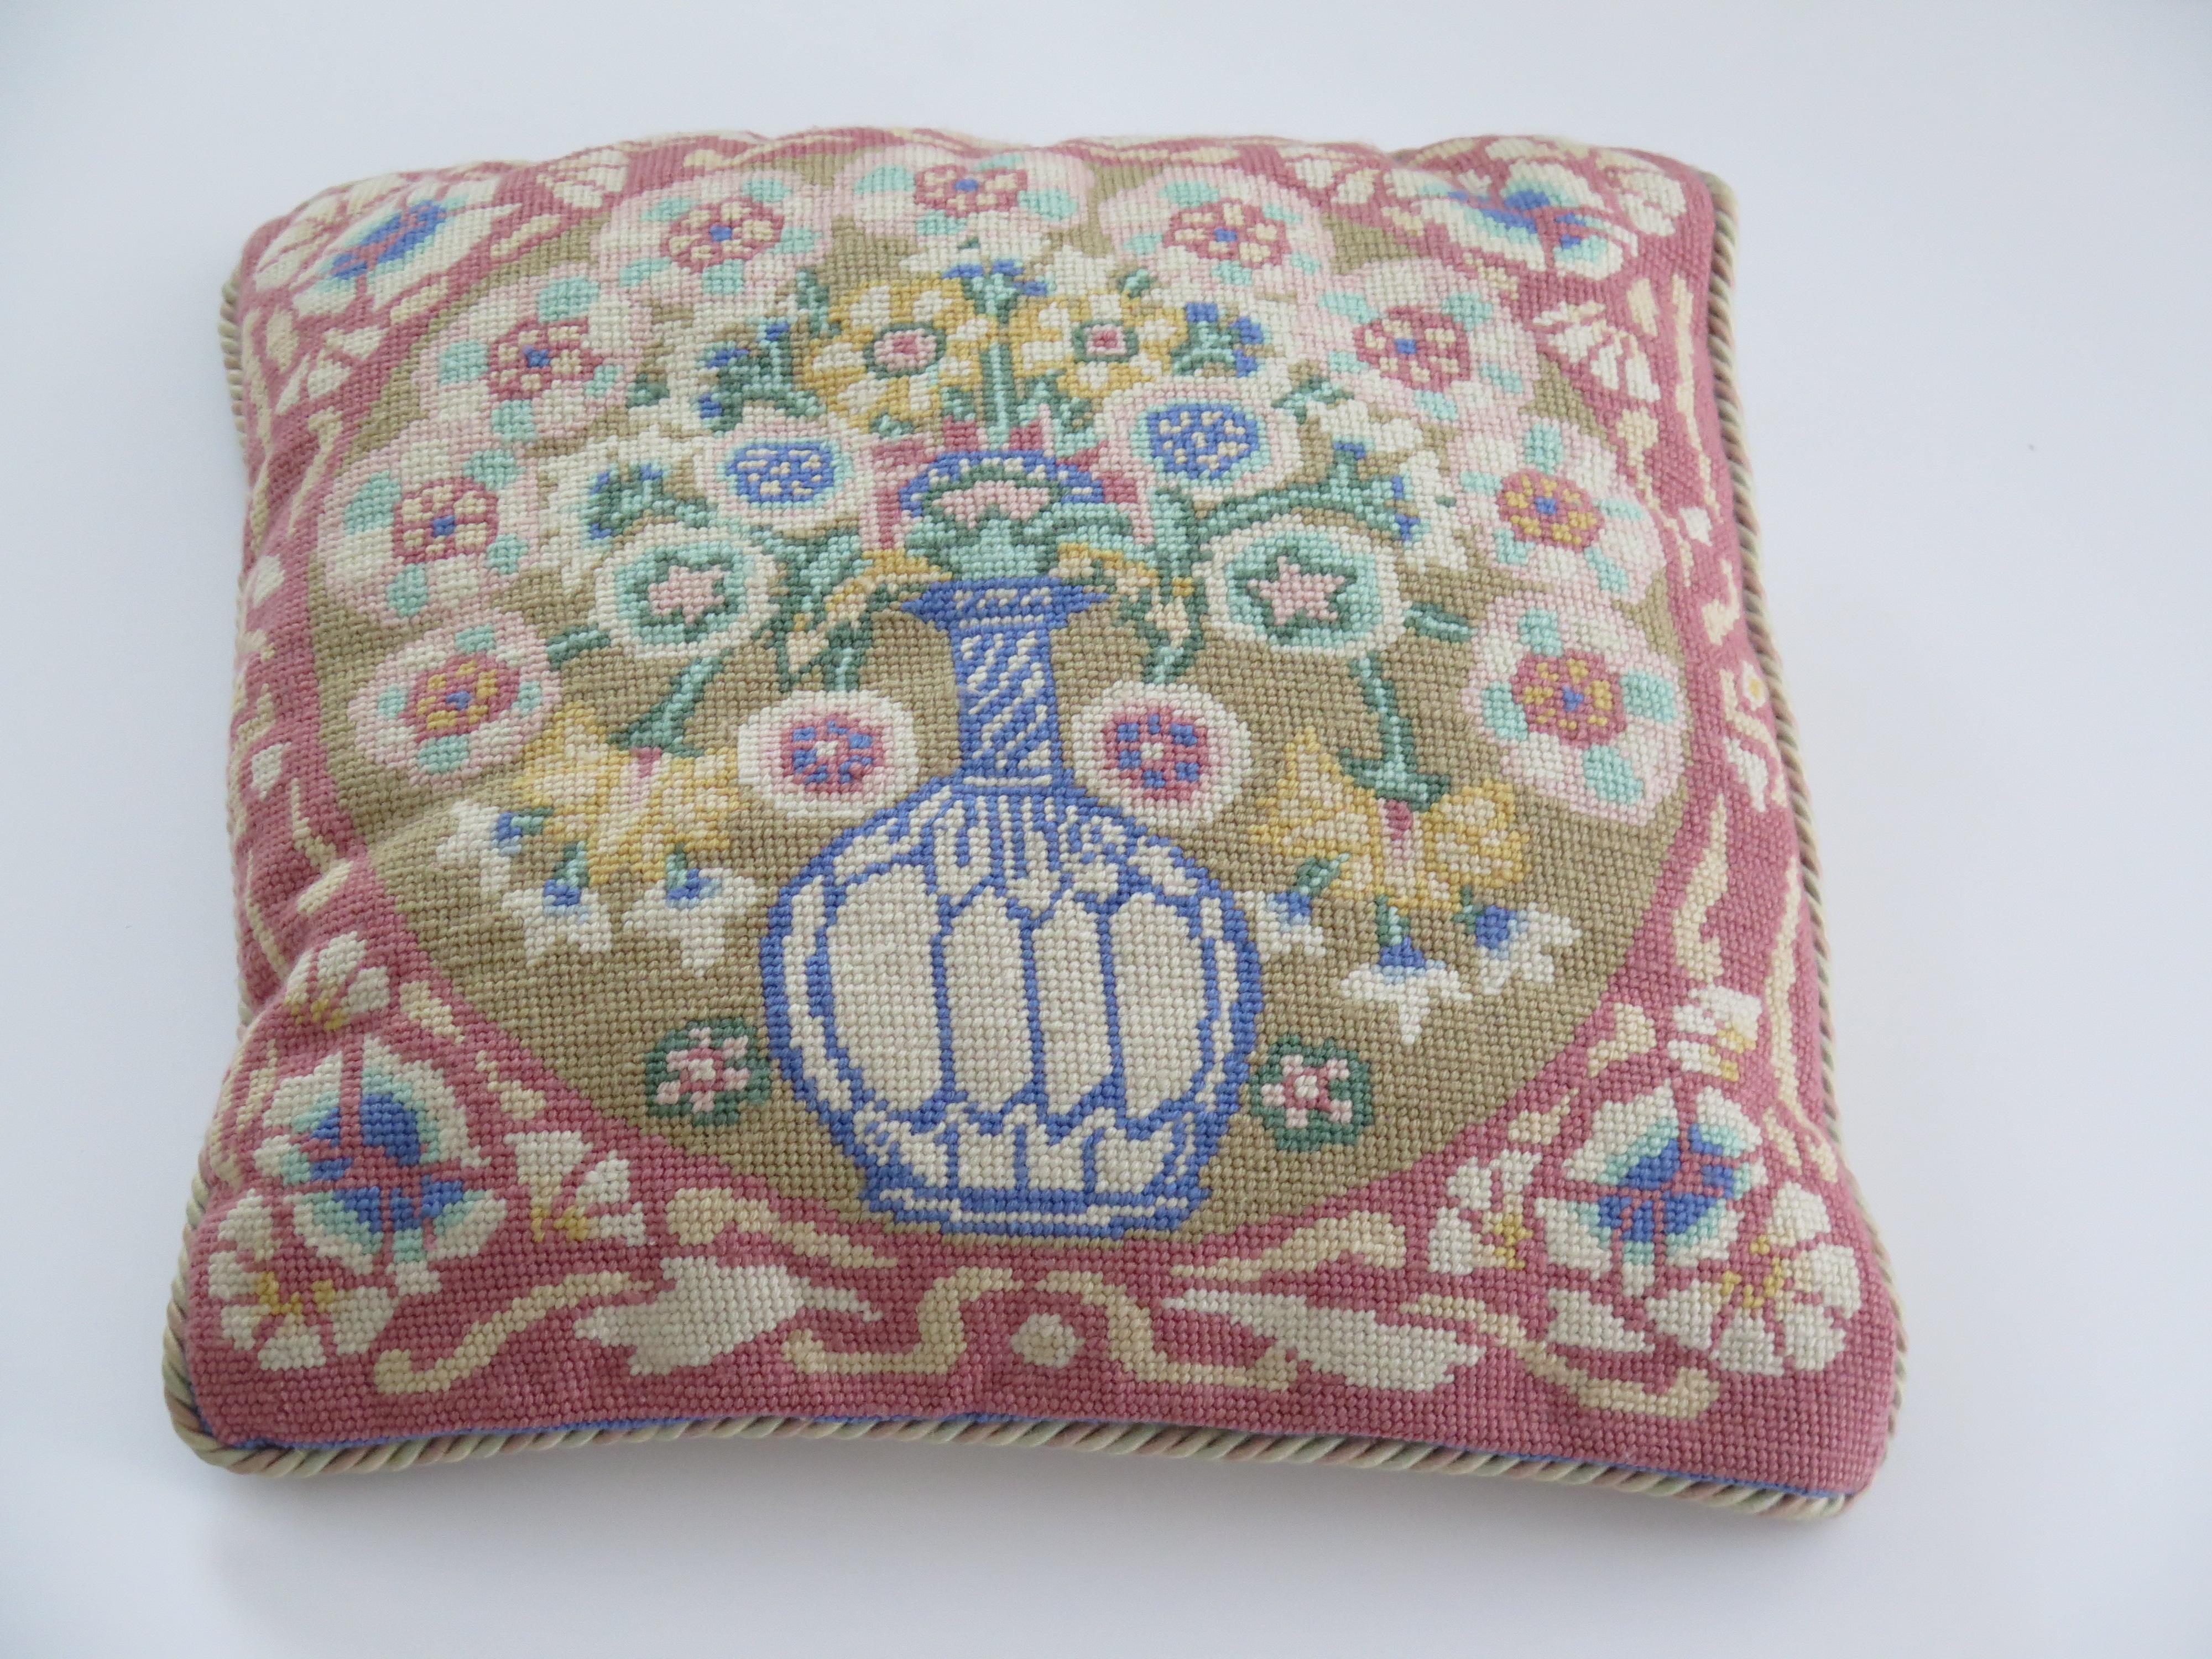 English Woven Cushion or Pillow with Flower Vase pattern in pastel shades, Circa 1930s For Sale